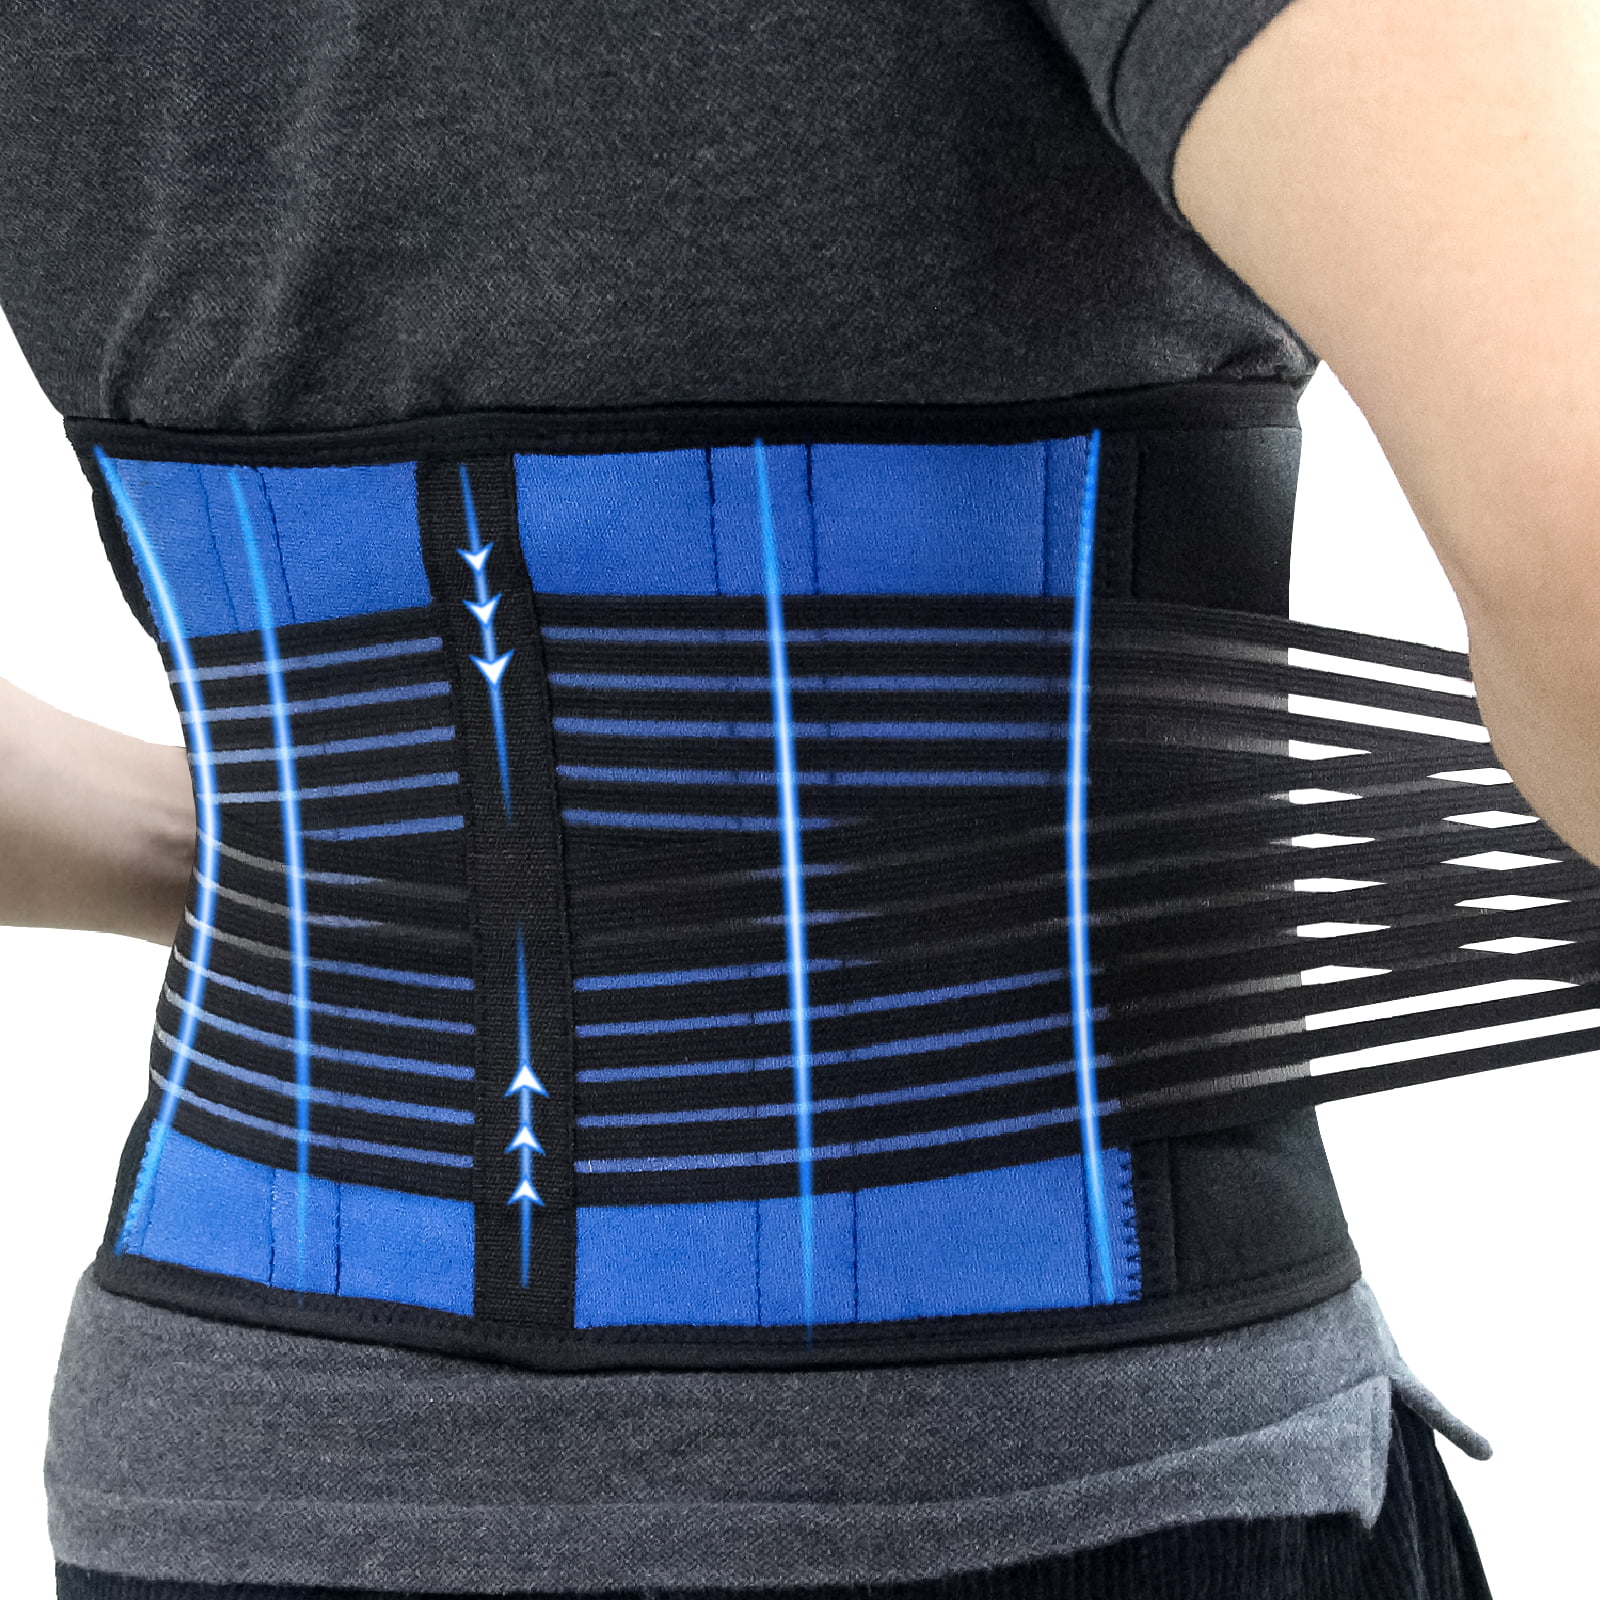 Aptoco Lumbar Support Belt Double-Pull Neoprene Protect Lower Back Support  Brace Heavy Weight Lifting Exercise Belt, L - Walmart.com